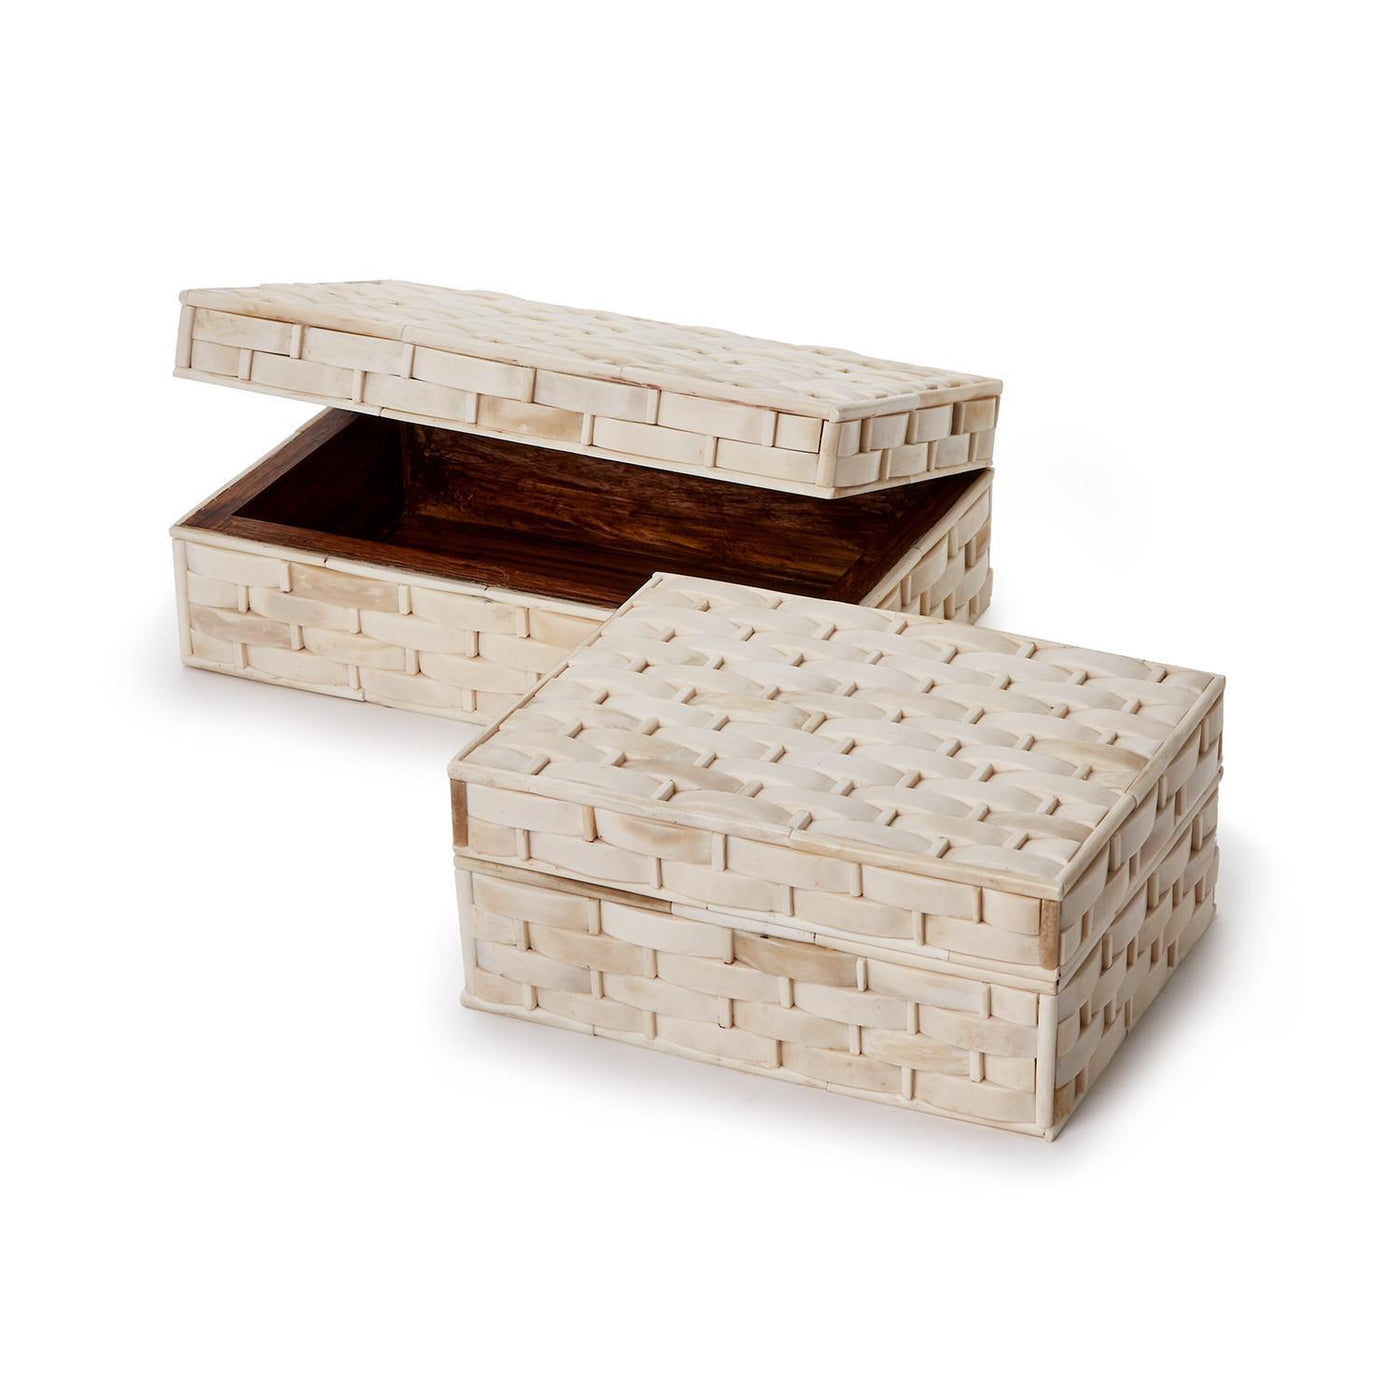 BOX BASKETWEAVE BONE (Available in 2 Sizes)